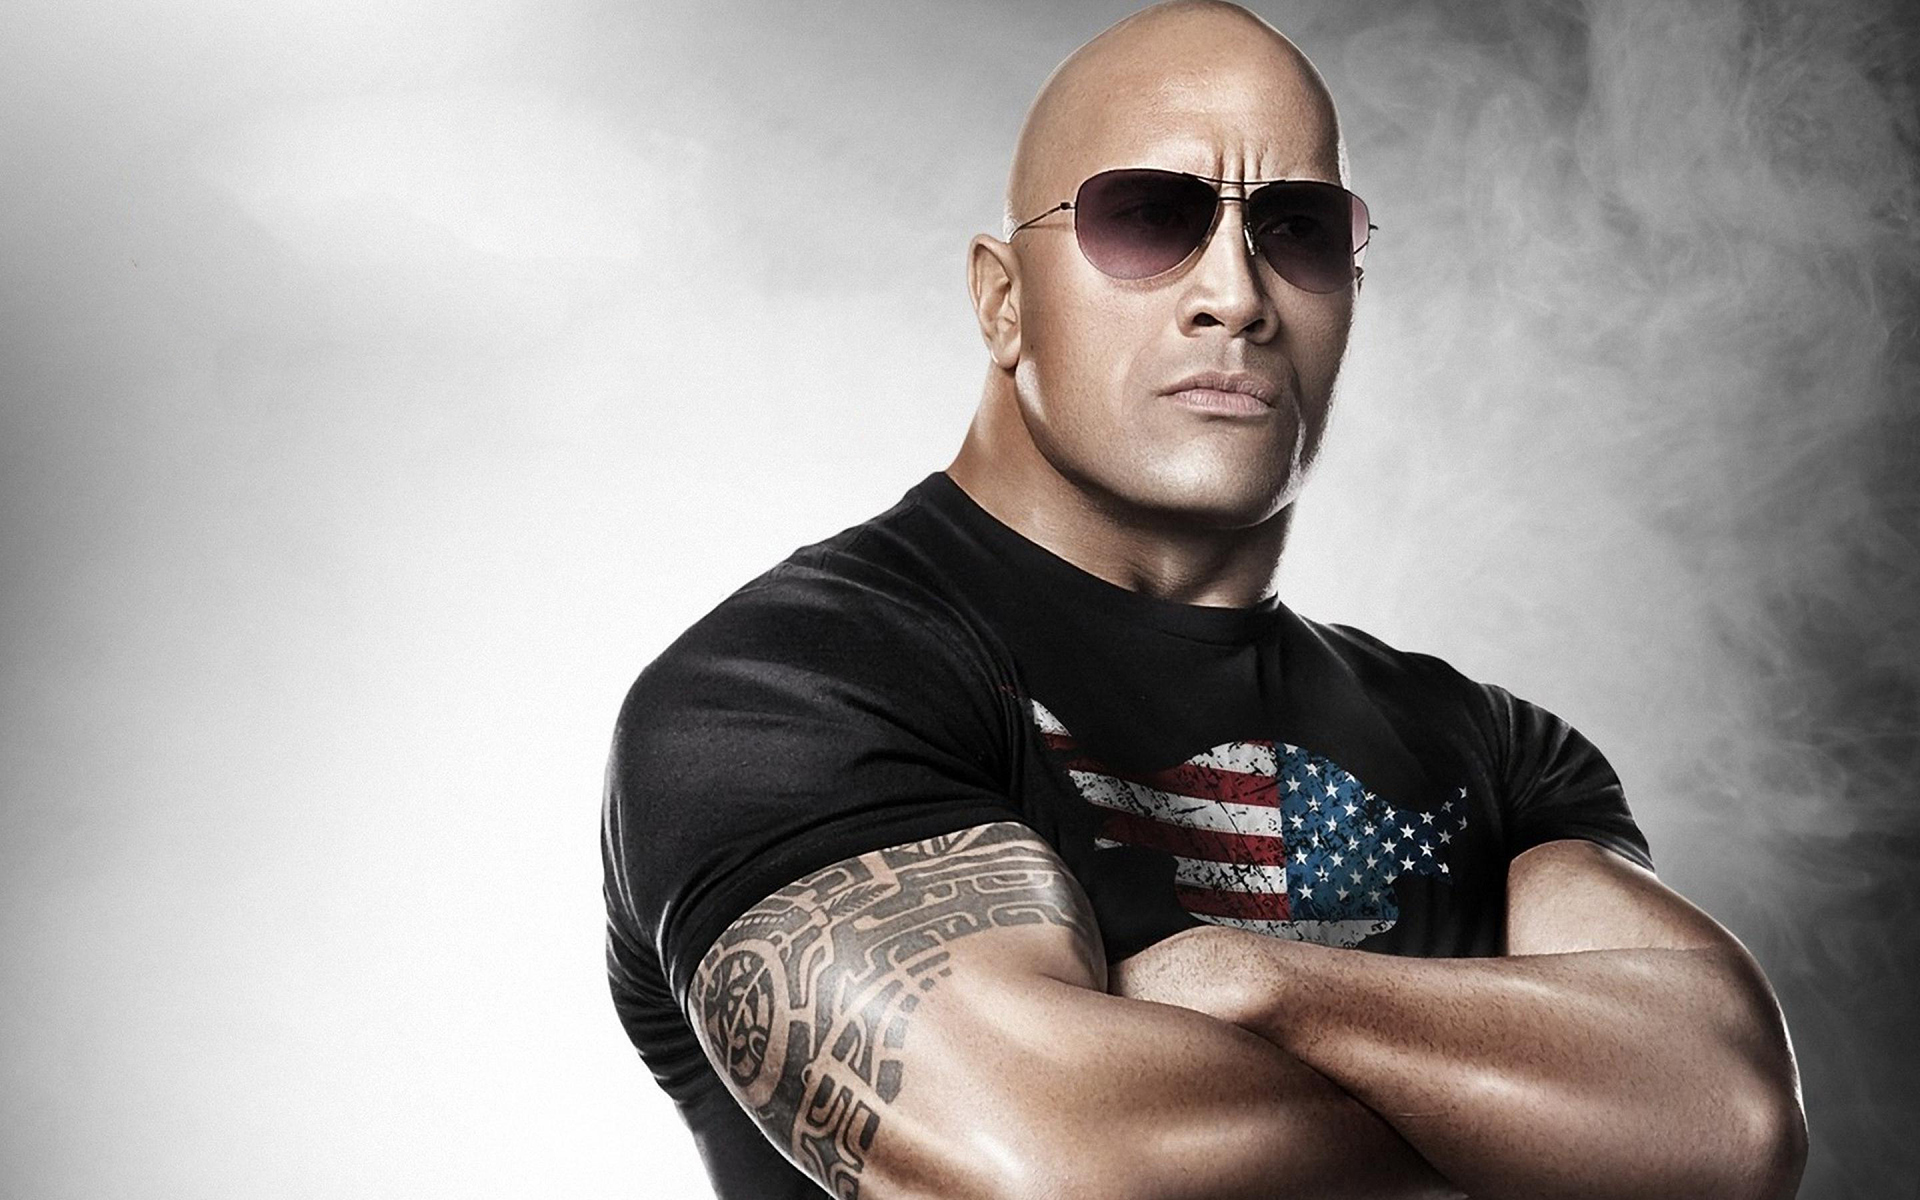 Poll: What’s your favorite film featuring Dwayne “The Rock” Johnson?